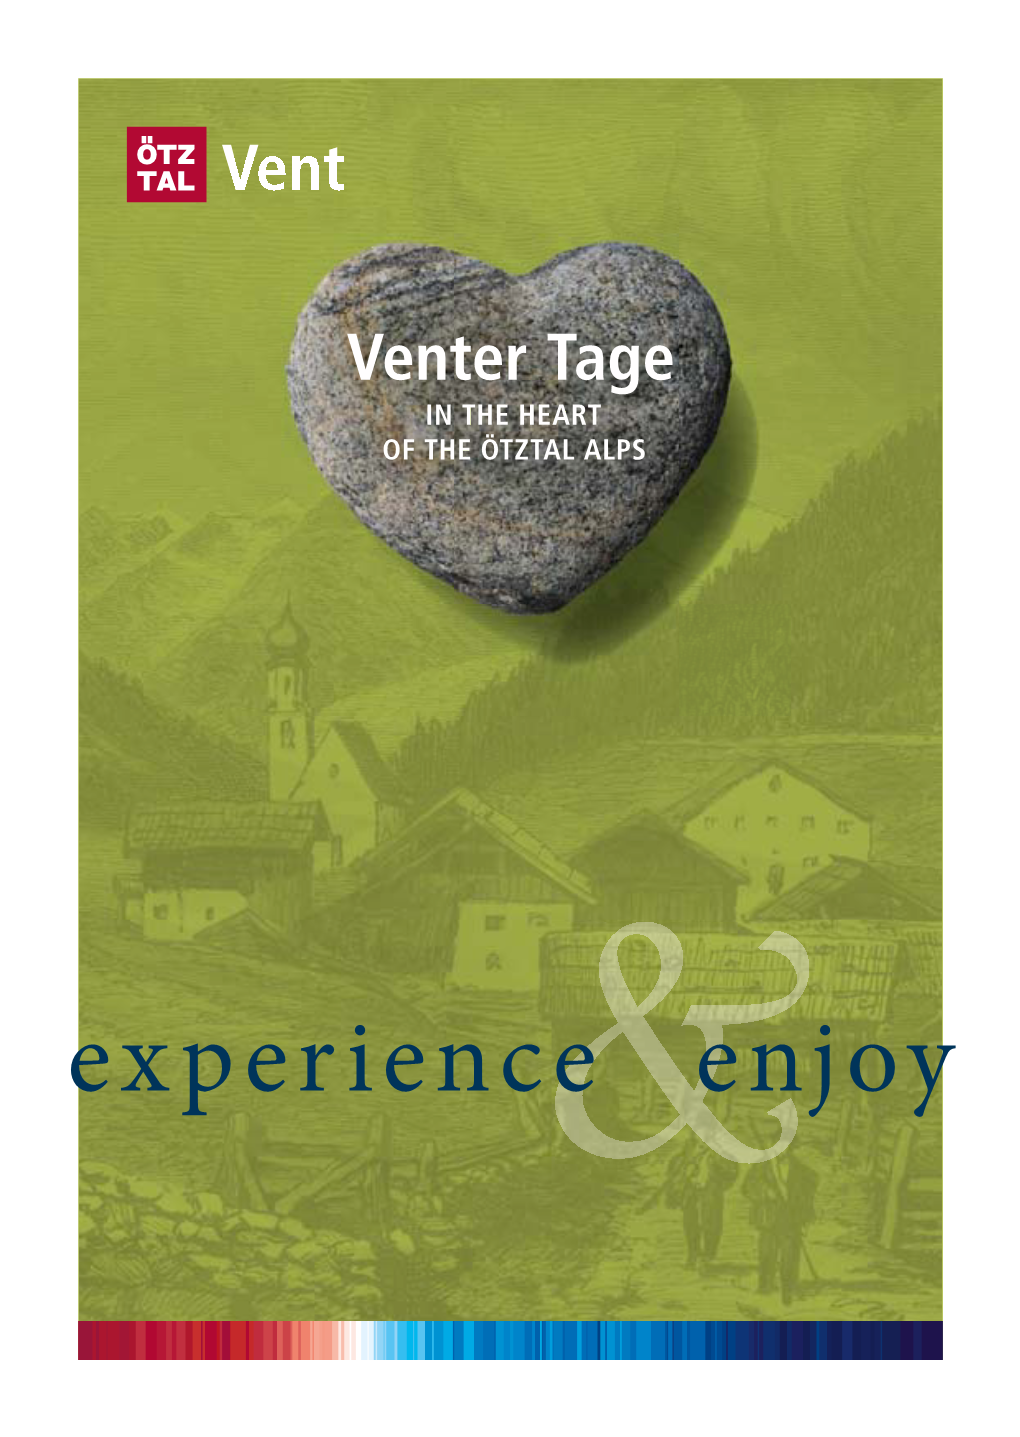 Venter Tage «, (Days in Vent)